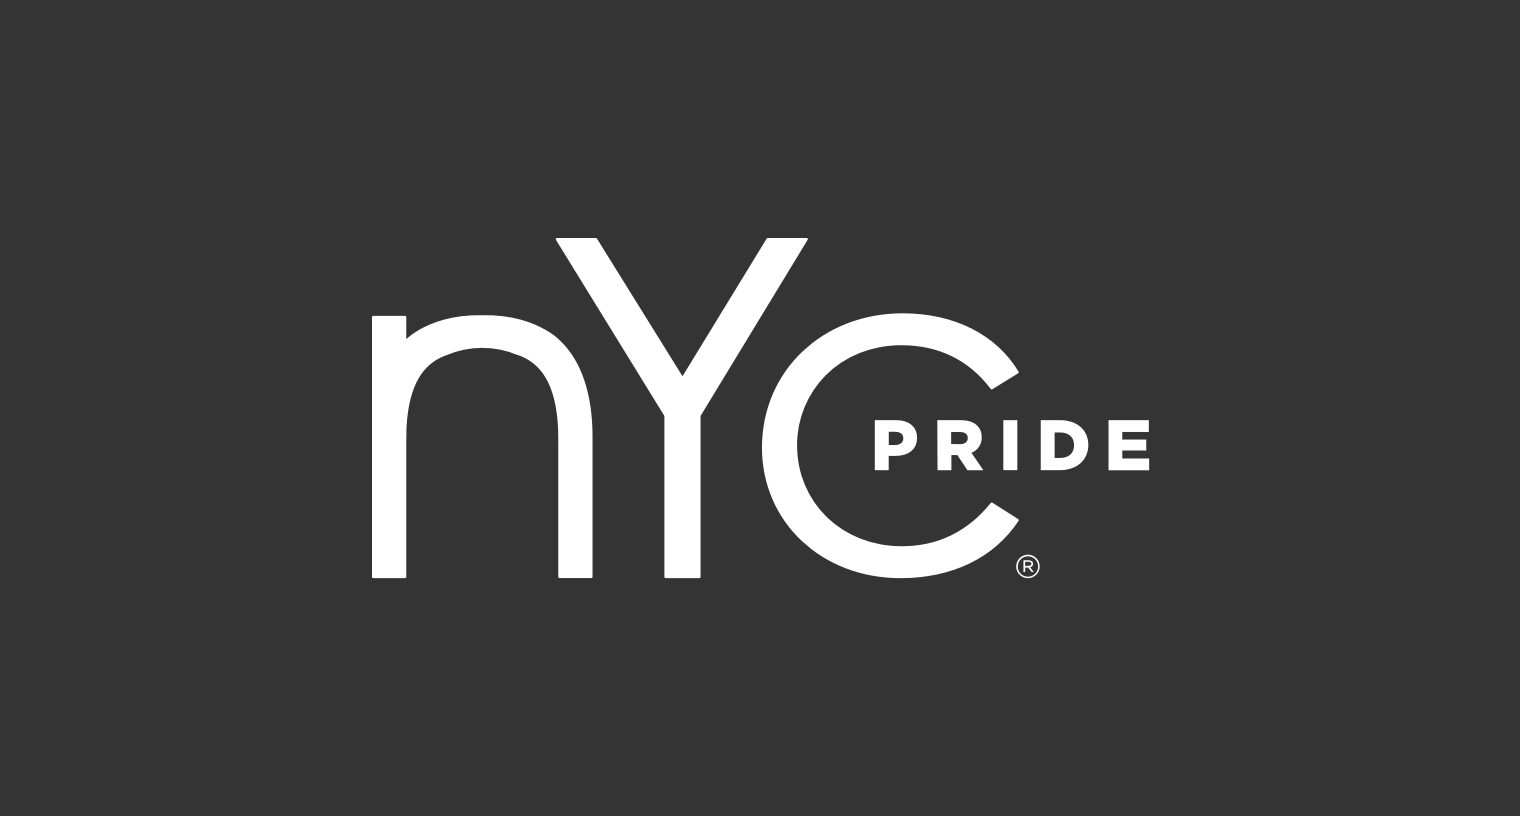 NYC Pride 2021: The Fight Continues